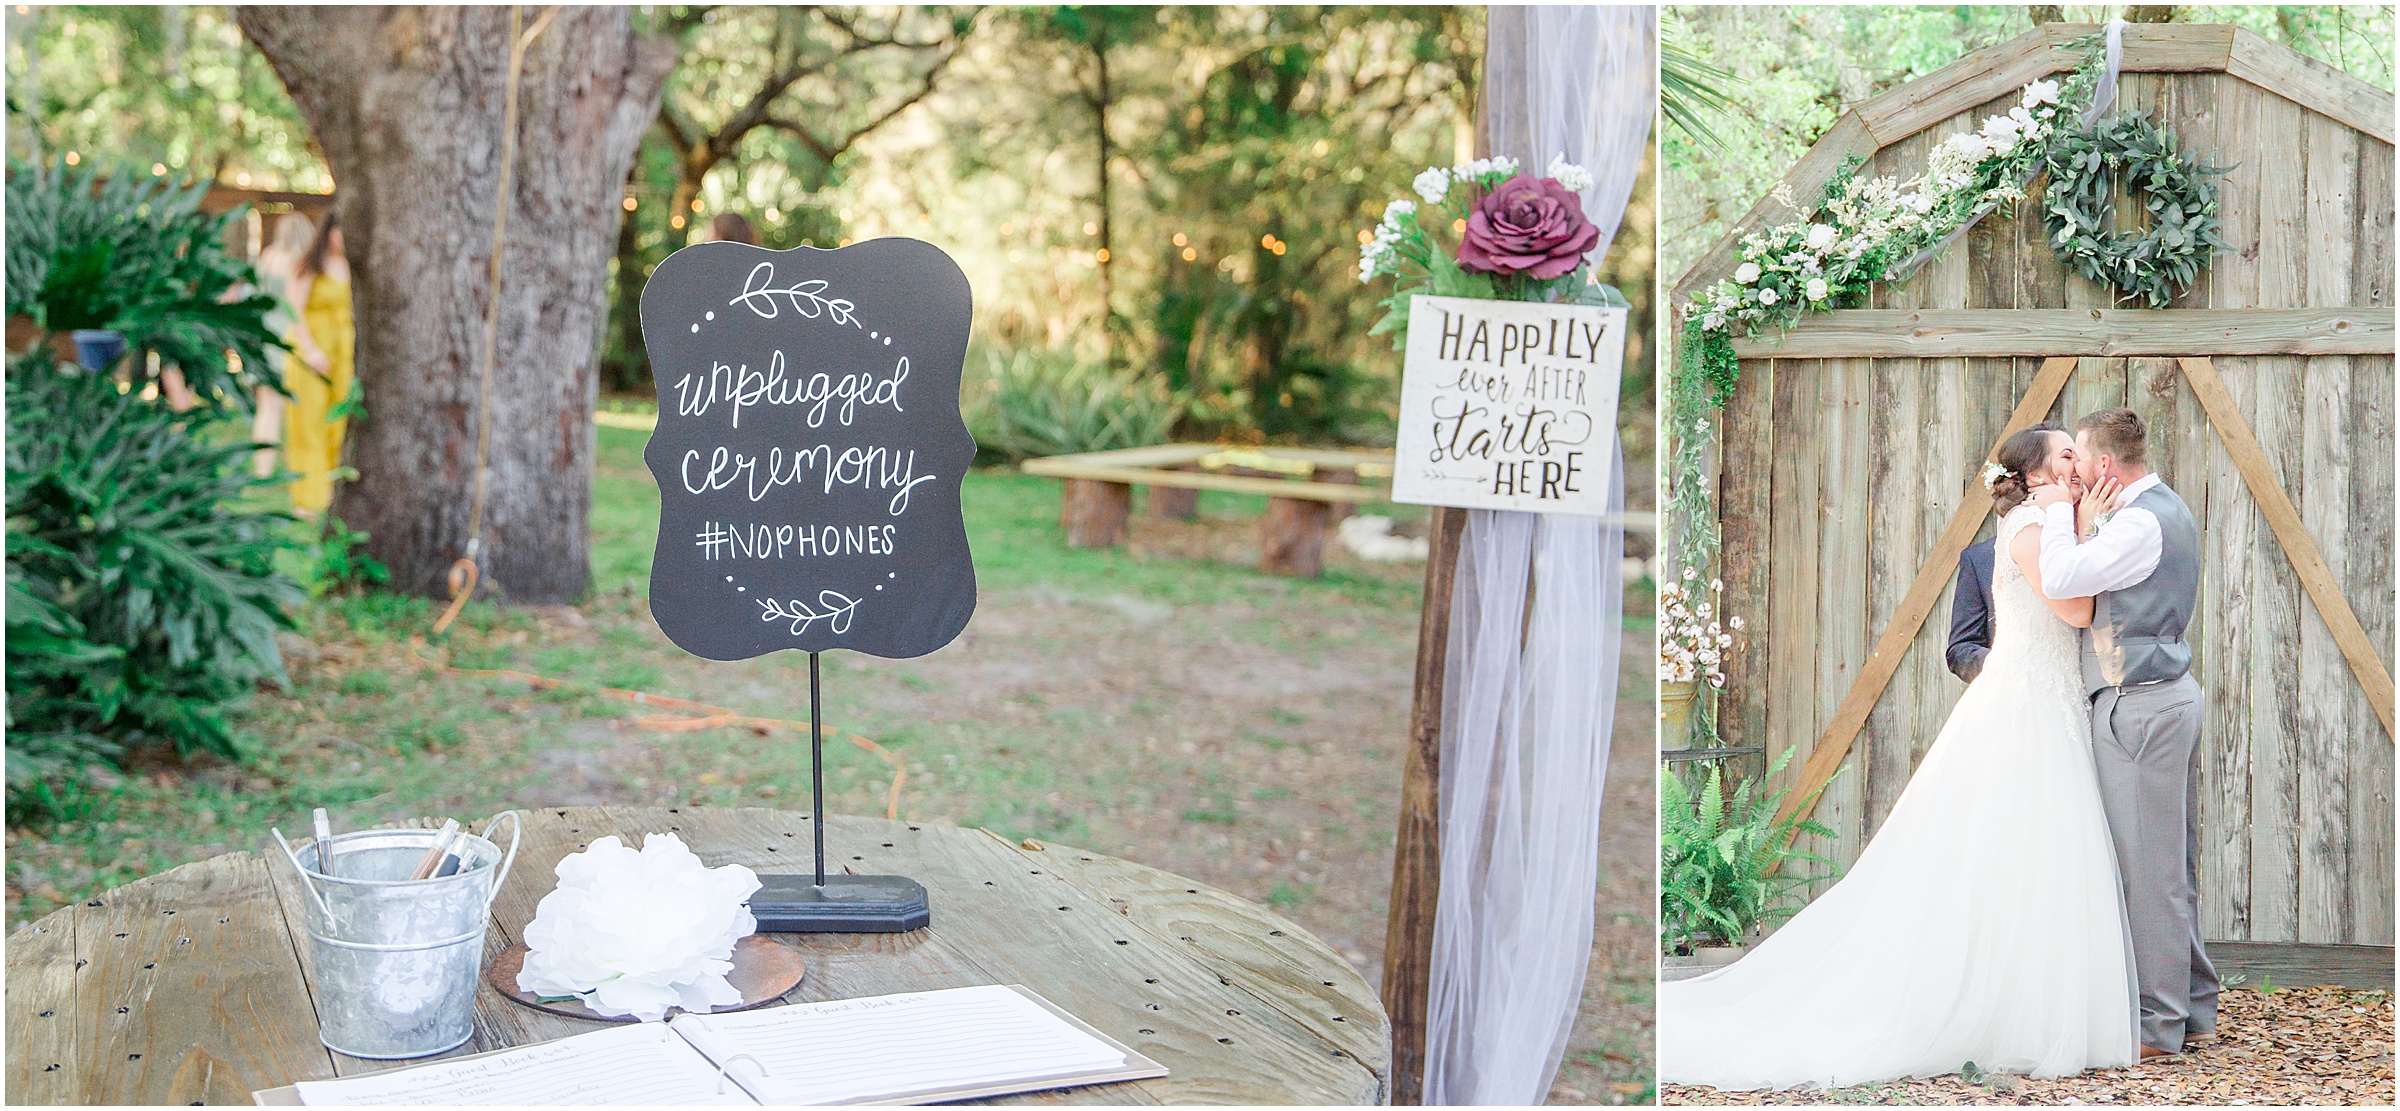 Blog post about why you should consider an unplugged ceremony